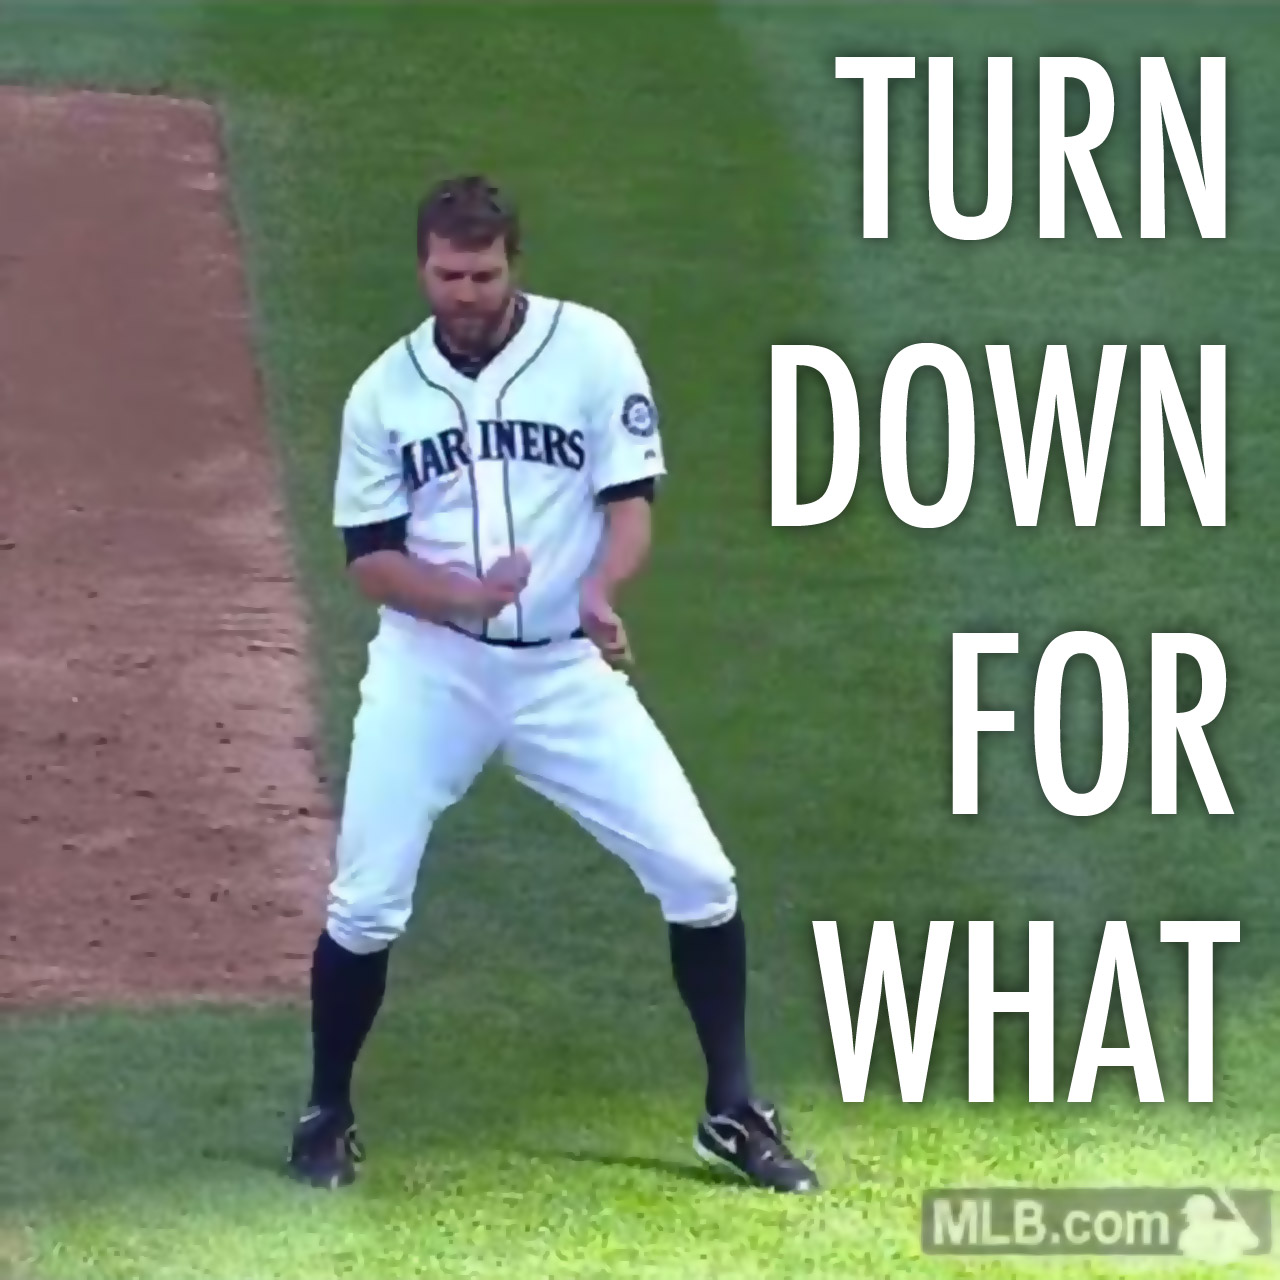 Mariners relief pitcher Tom Wilhelmsen dancing to "Turn Down For What"